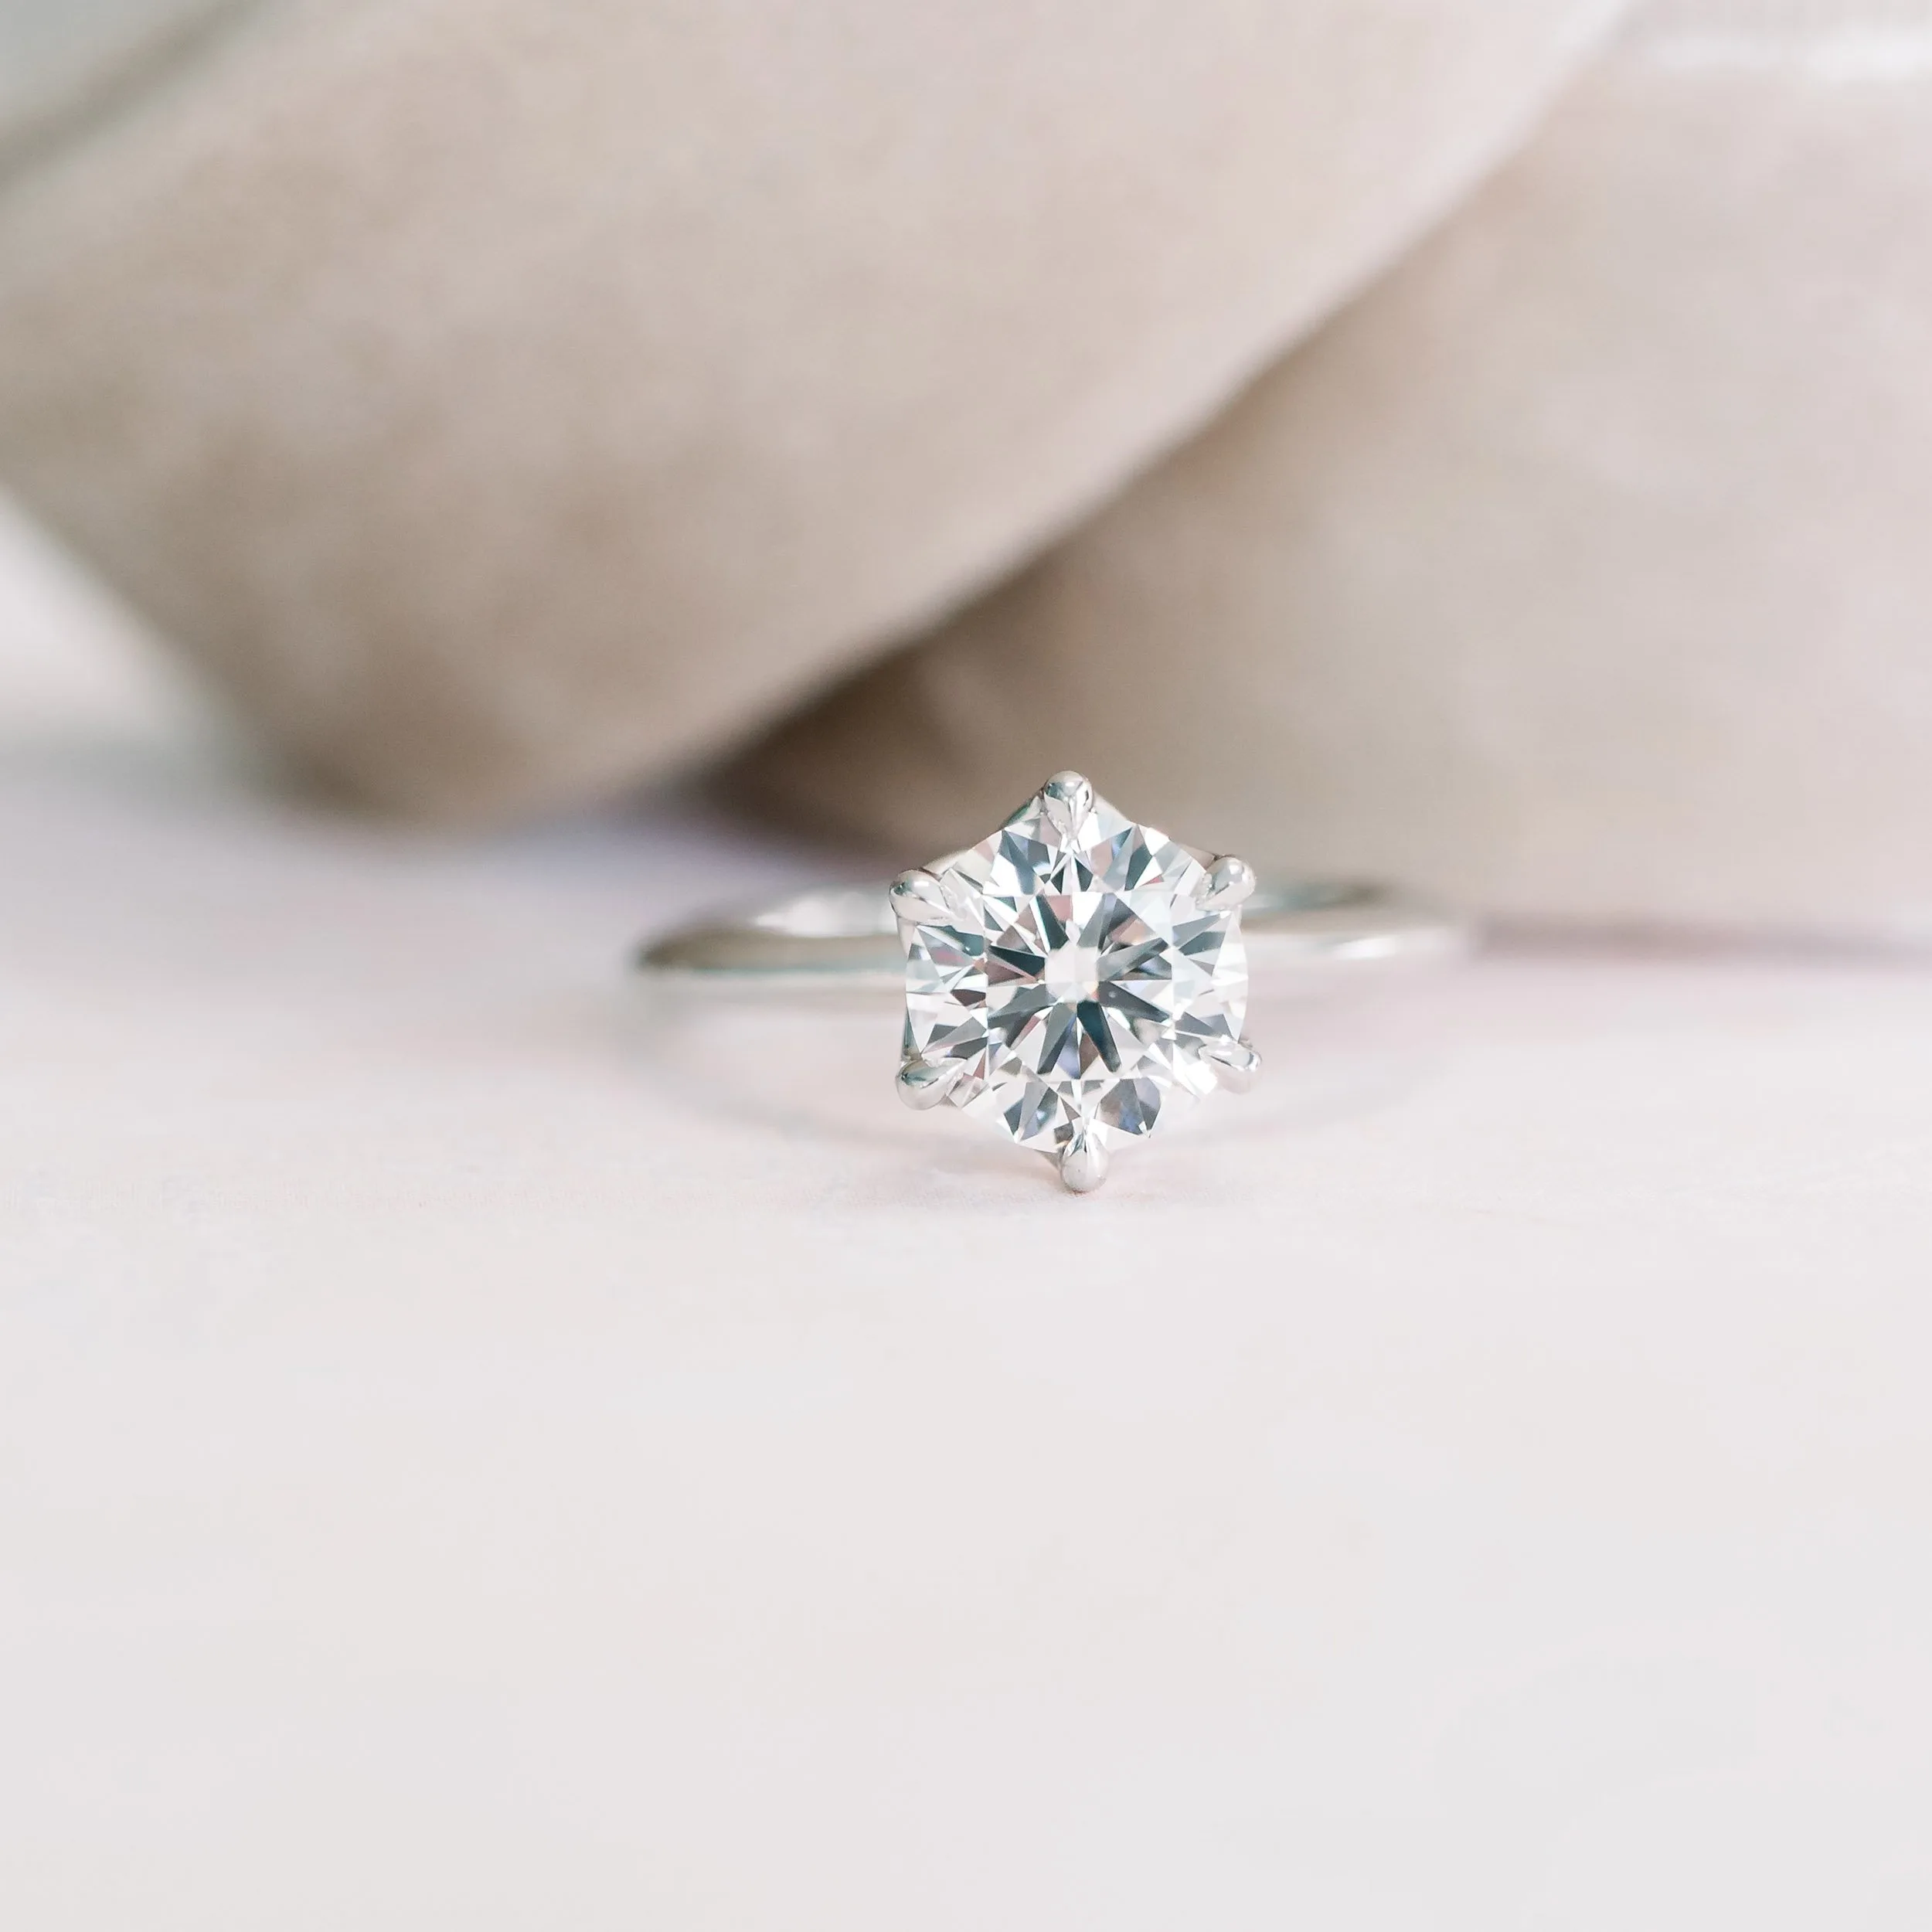 six-prong-solitaire-engagement-ring-with-lab-diamond-in-platinum_1644816431942-DY5F5MLDJYI8AXUK5Y8E